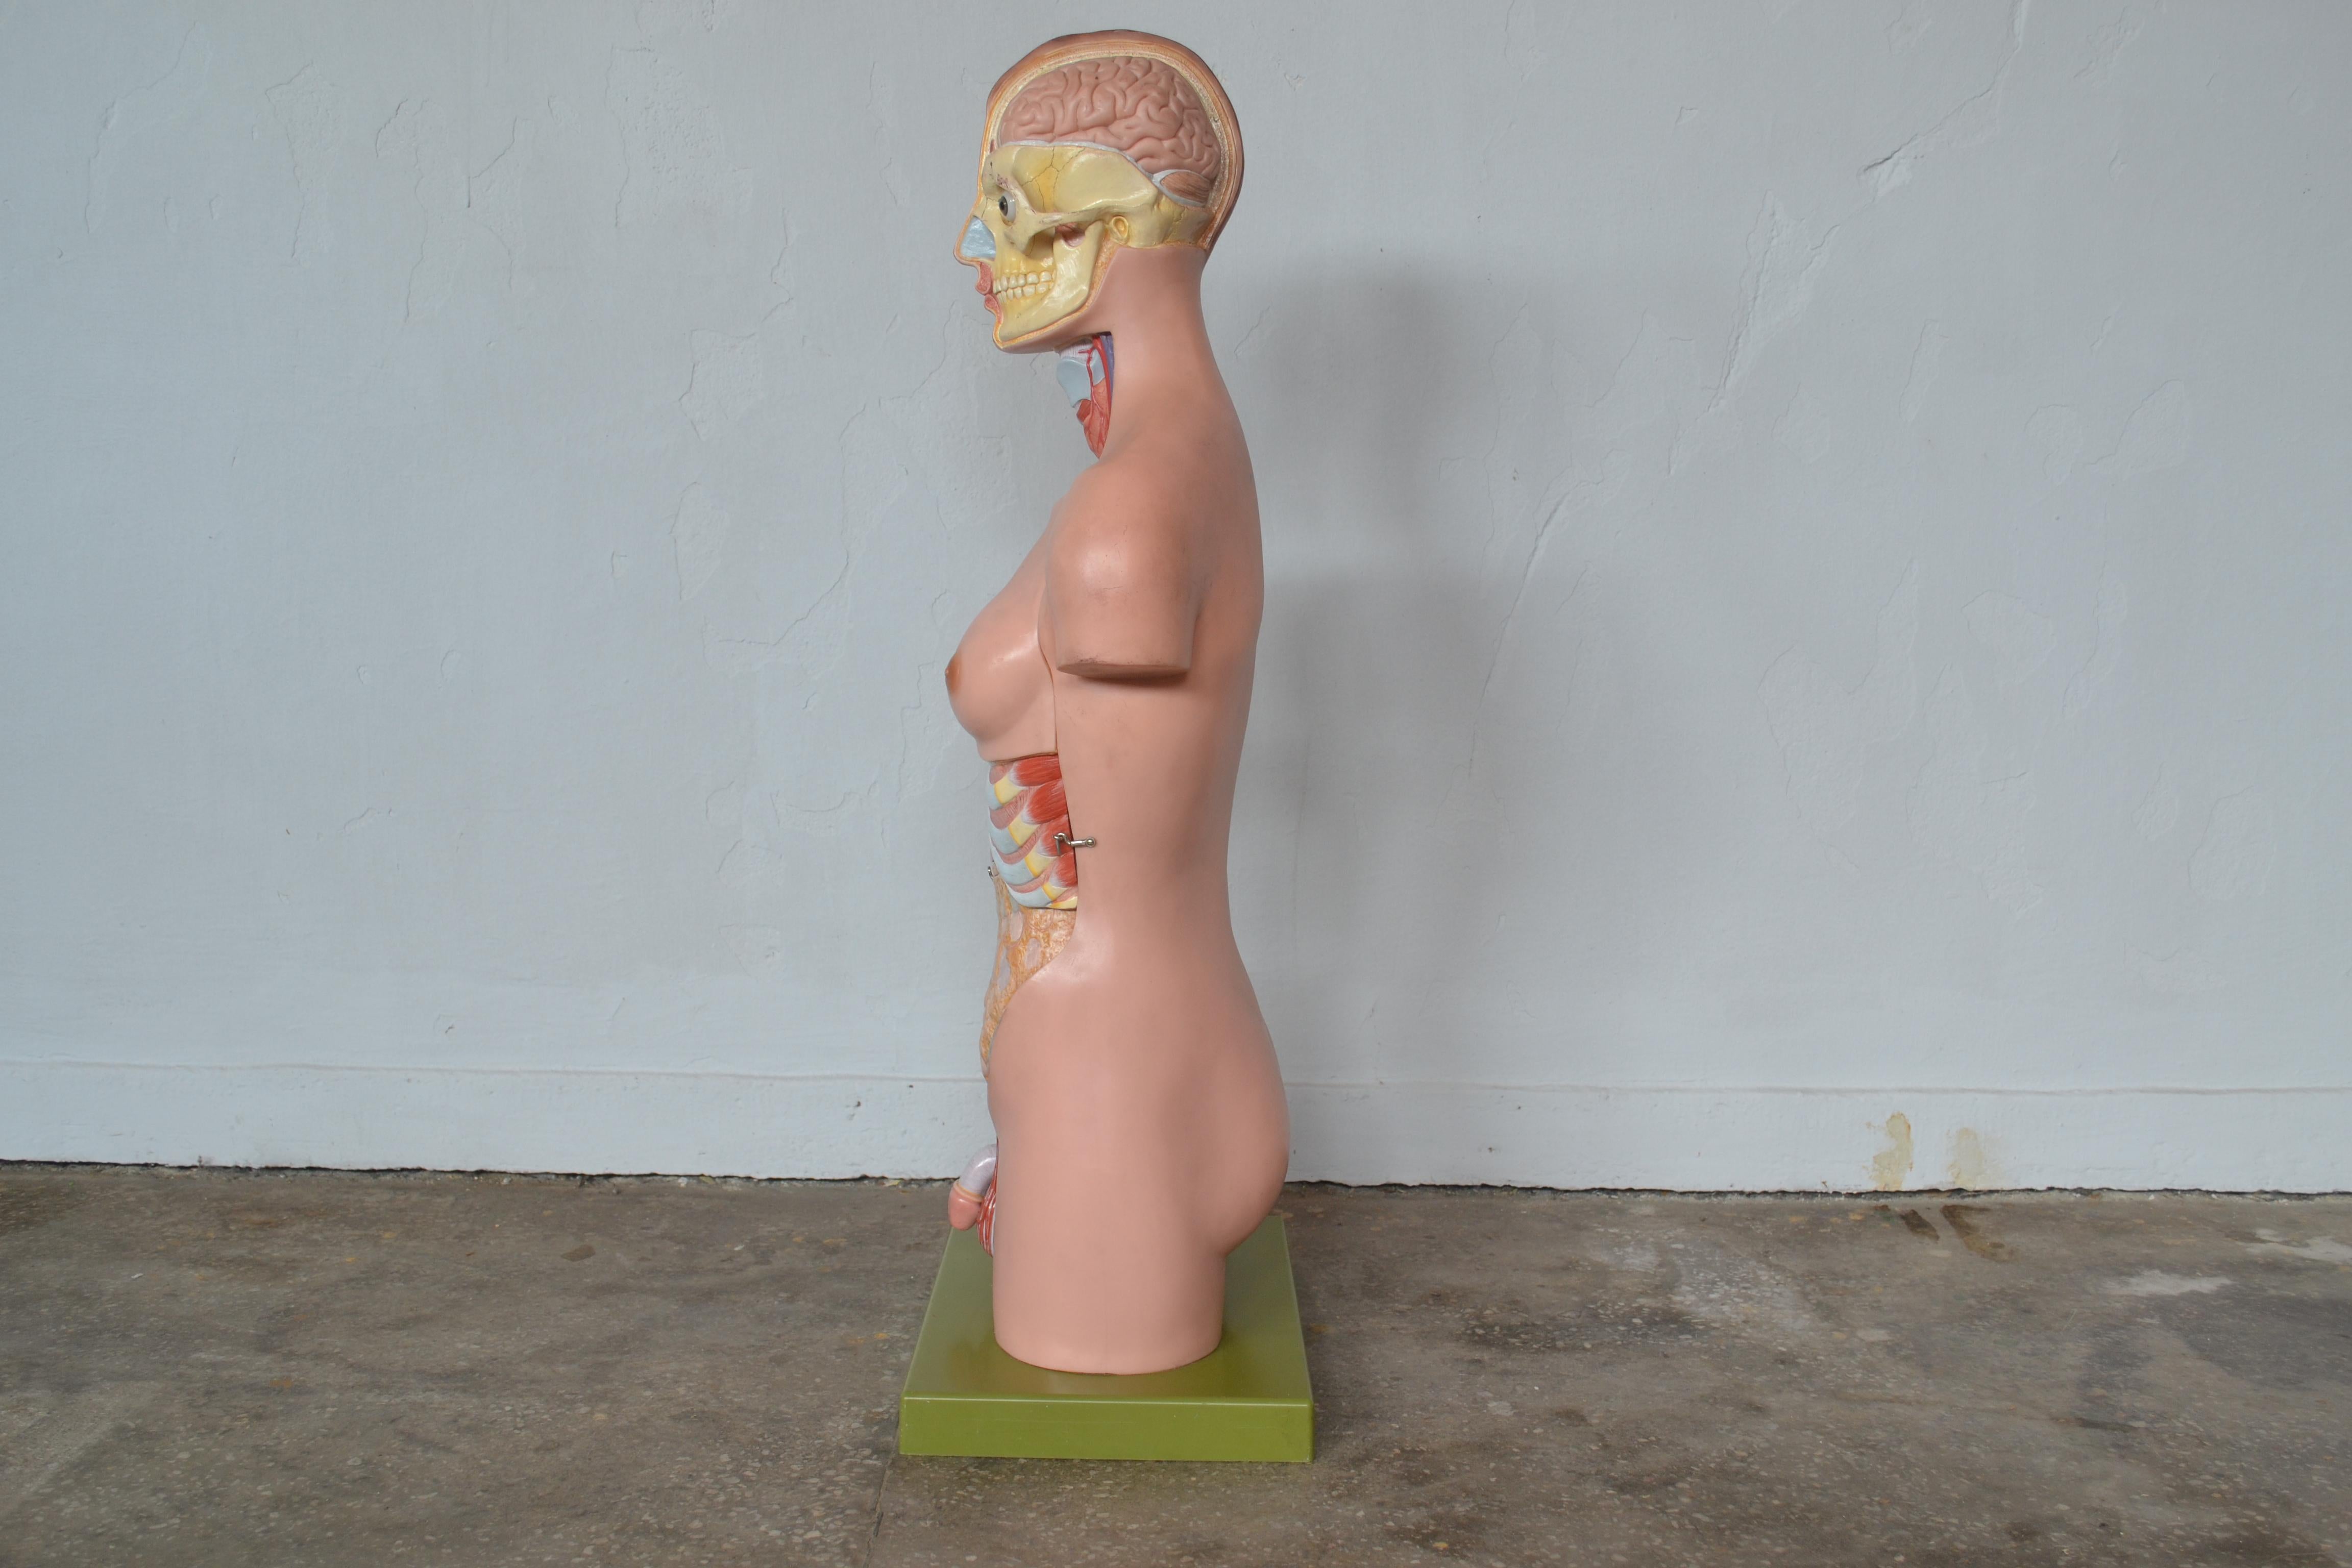 This anatomical sculpture was designed by Marcus Sommer in the 1960s. It was hand-painted and is signed by the maker.